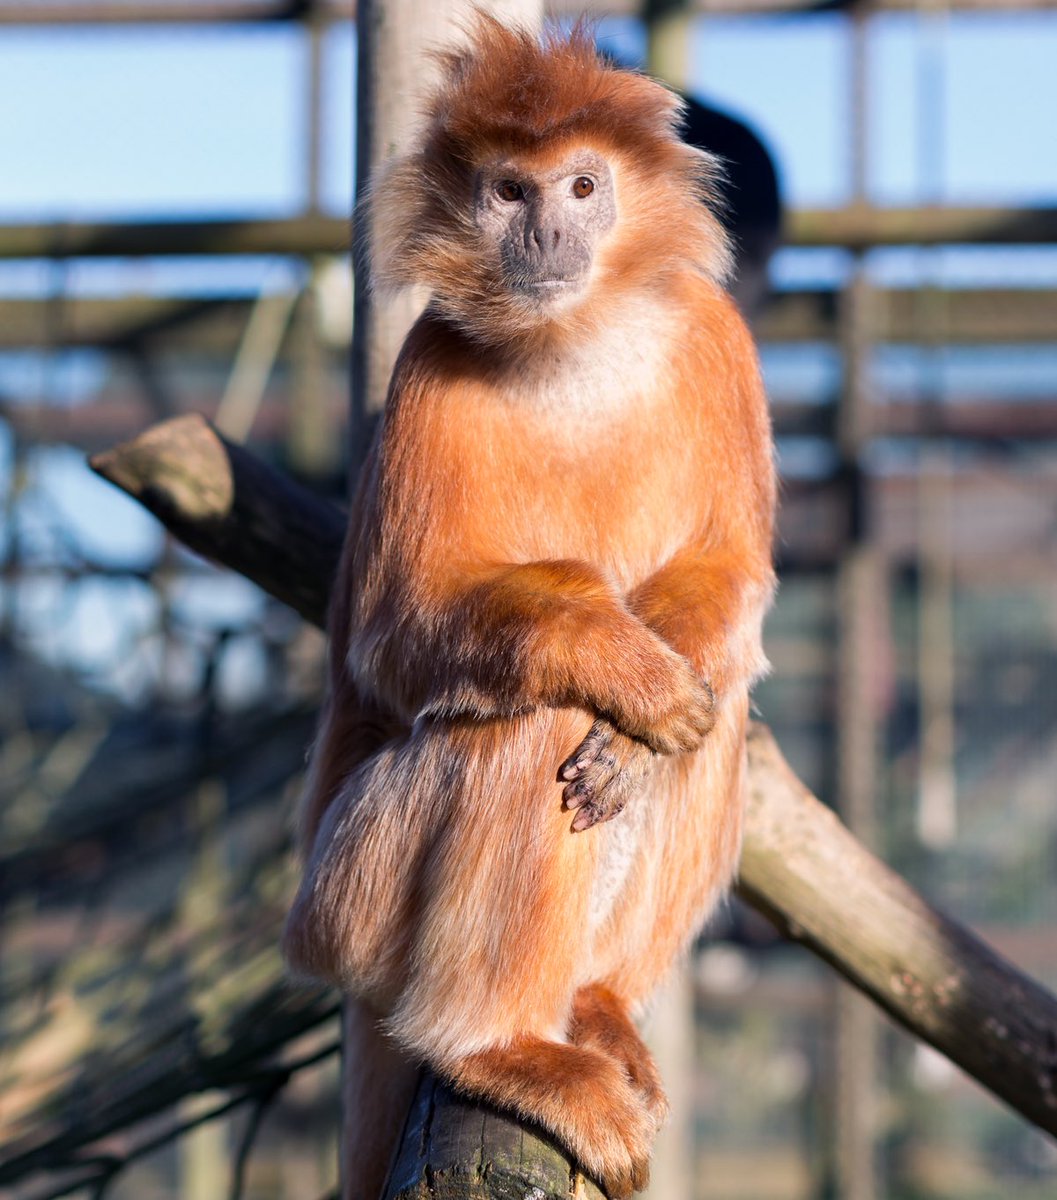 His little hands 🥹🤝 Gorgeous Wheat, waiting patiently for visitors to arrive 🧡 See you soon! monkeyhaven.org

#javanlangur #monkey #sanctuary #primates #haven